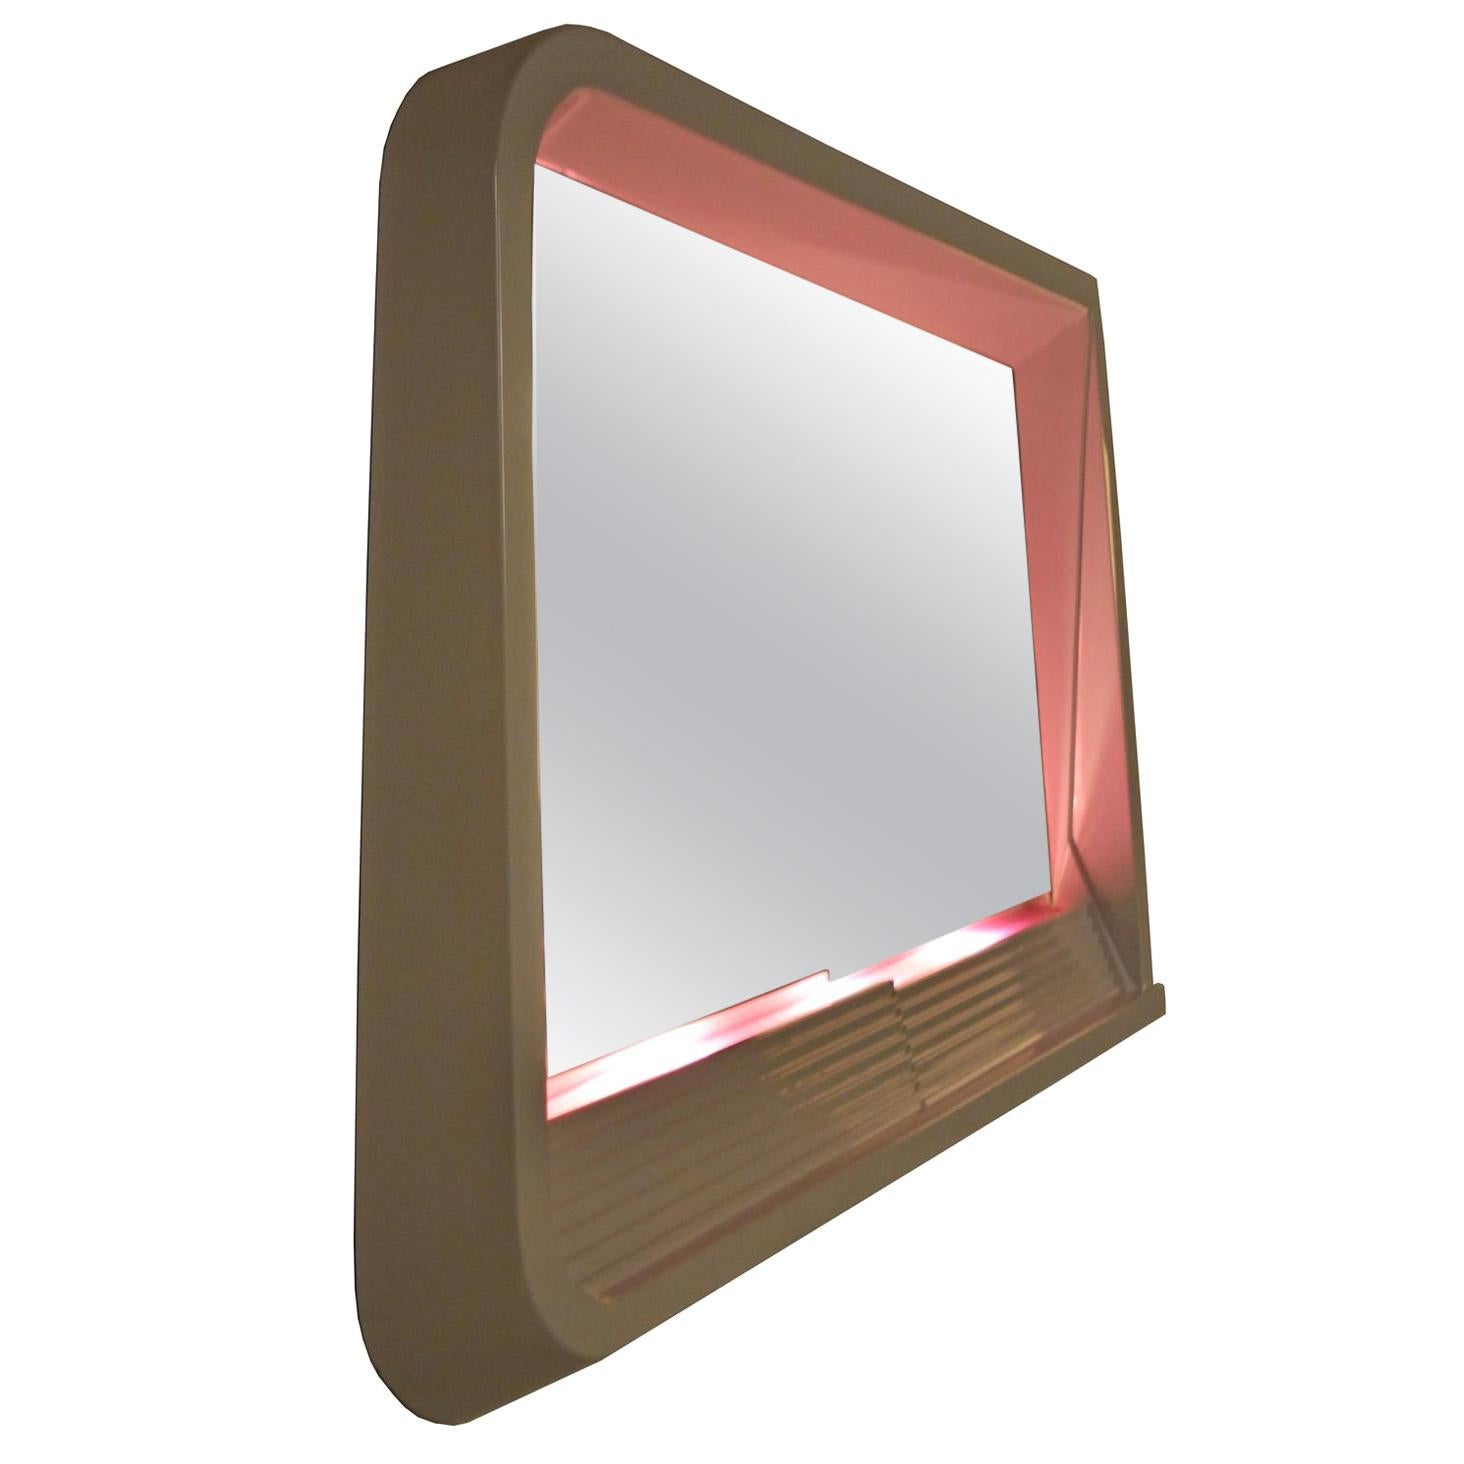 It simply doesn't get any cooler than this epic Postmodern Art Deco revival Futurist lighted wall mirror. Allow the magical illumination to enhance the ambiance of your space and set the tone with its soft magenta hue. Bask in the sexy glow with